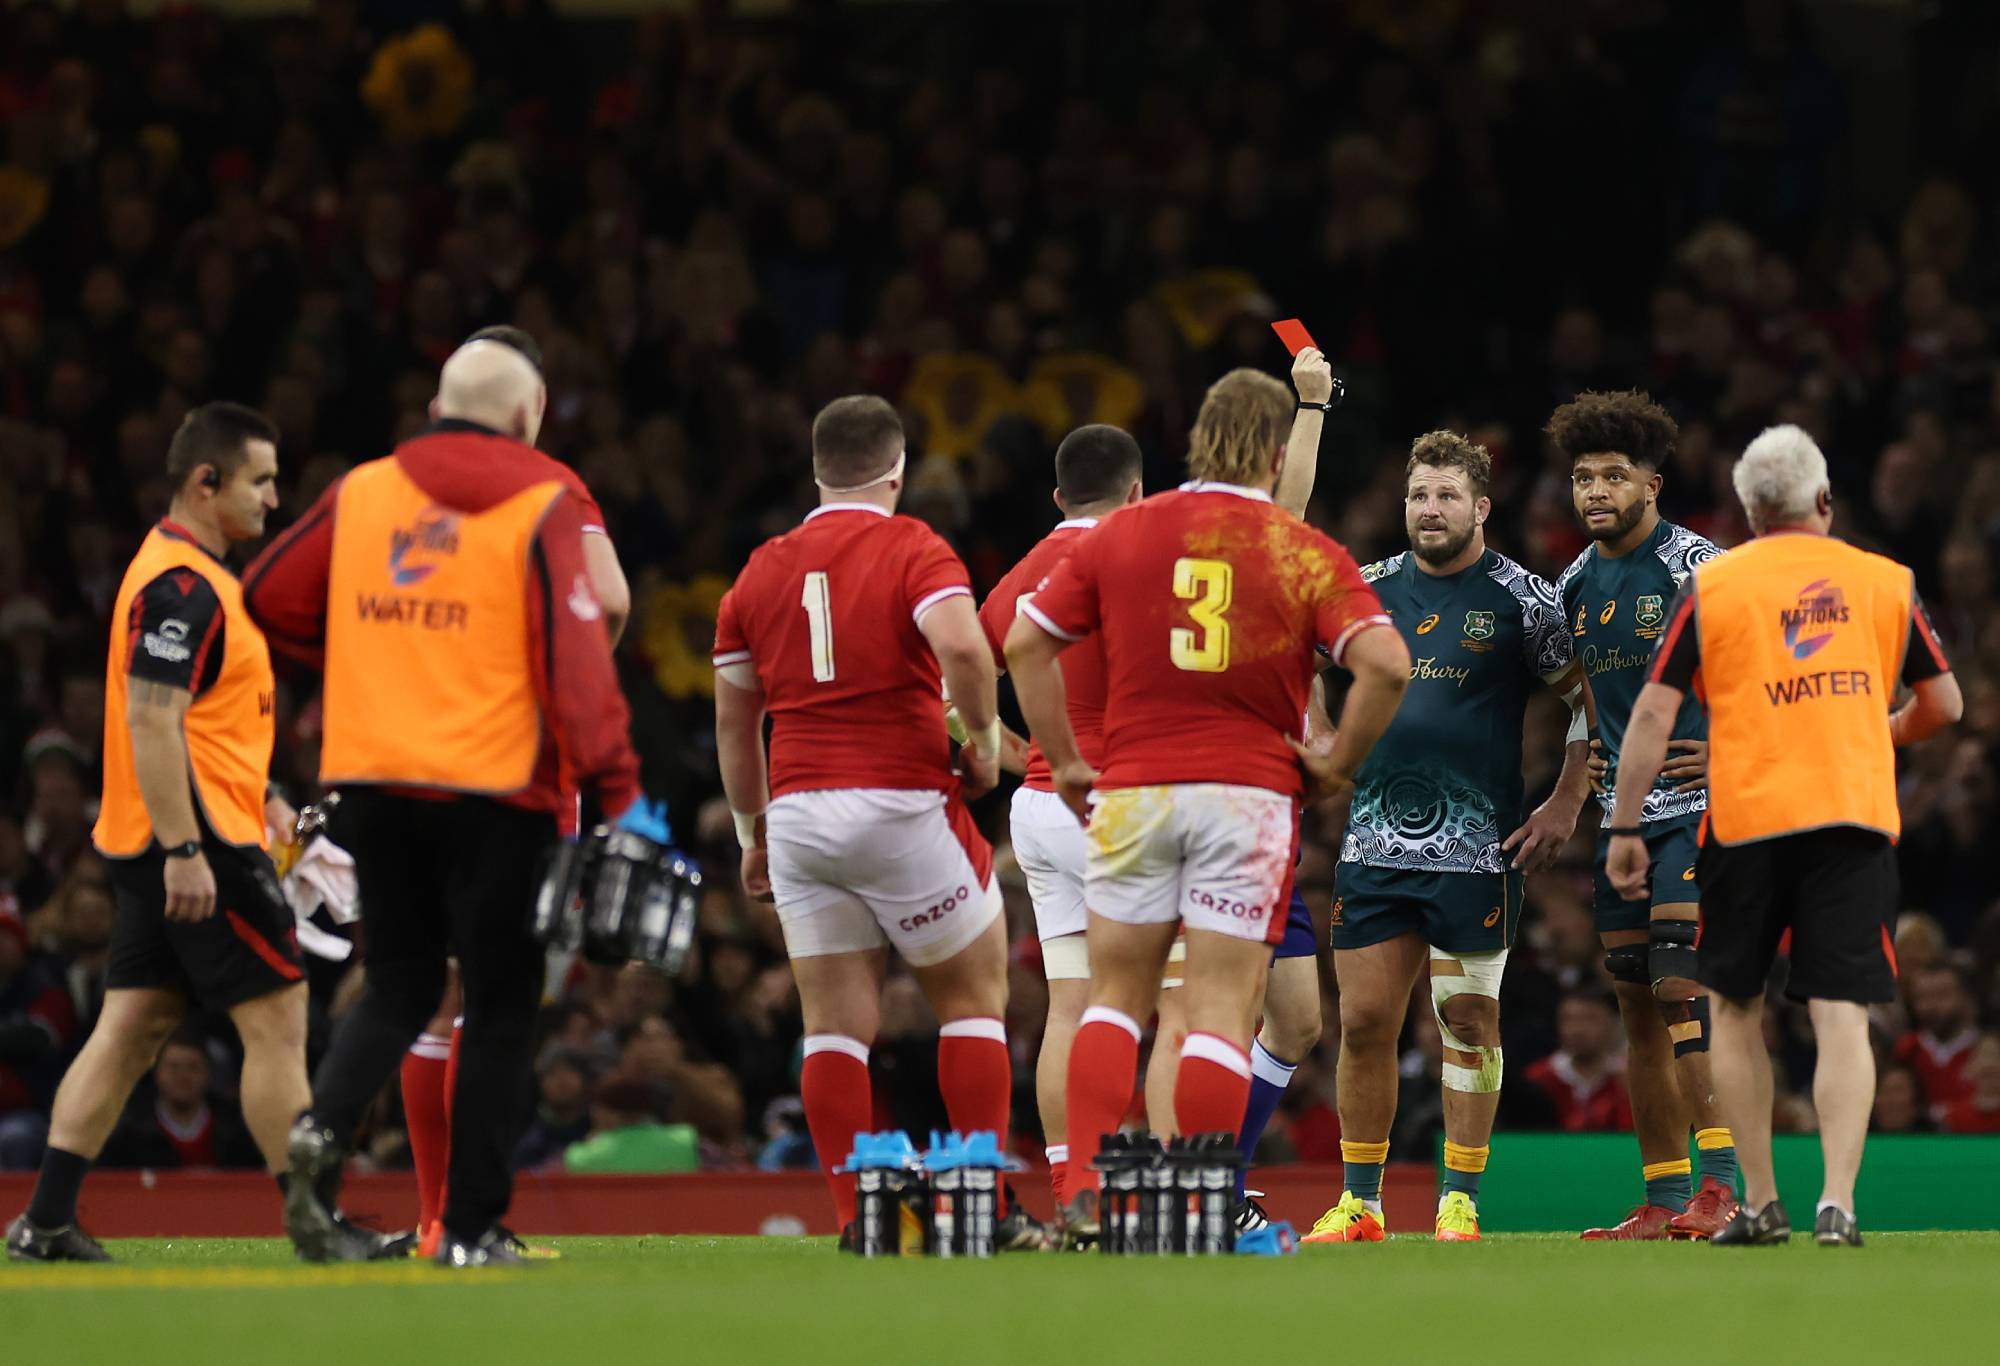 Rob Valetini of Australia is shown a red card during the Autumn Nations Series match between Wales and Australia at Principality Stadium on November 20, 2021 in Cardiff, Wales. (Photo by Richard Heathcote/Getty Images)